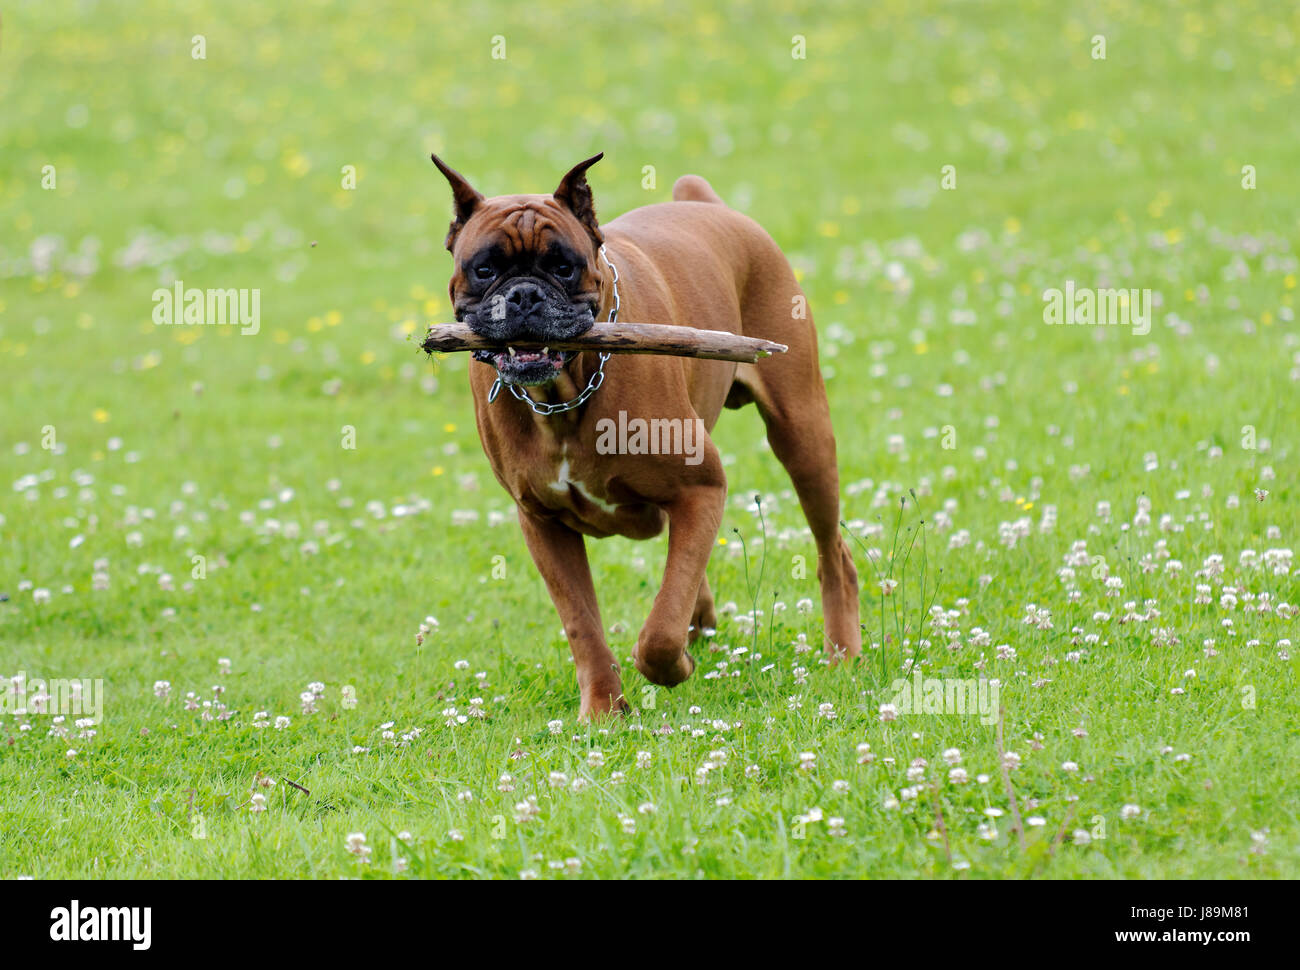 pet, bull, dog, breed, bulldog, boxer, canine, game, tournament, play, playing, Stock Photo